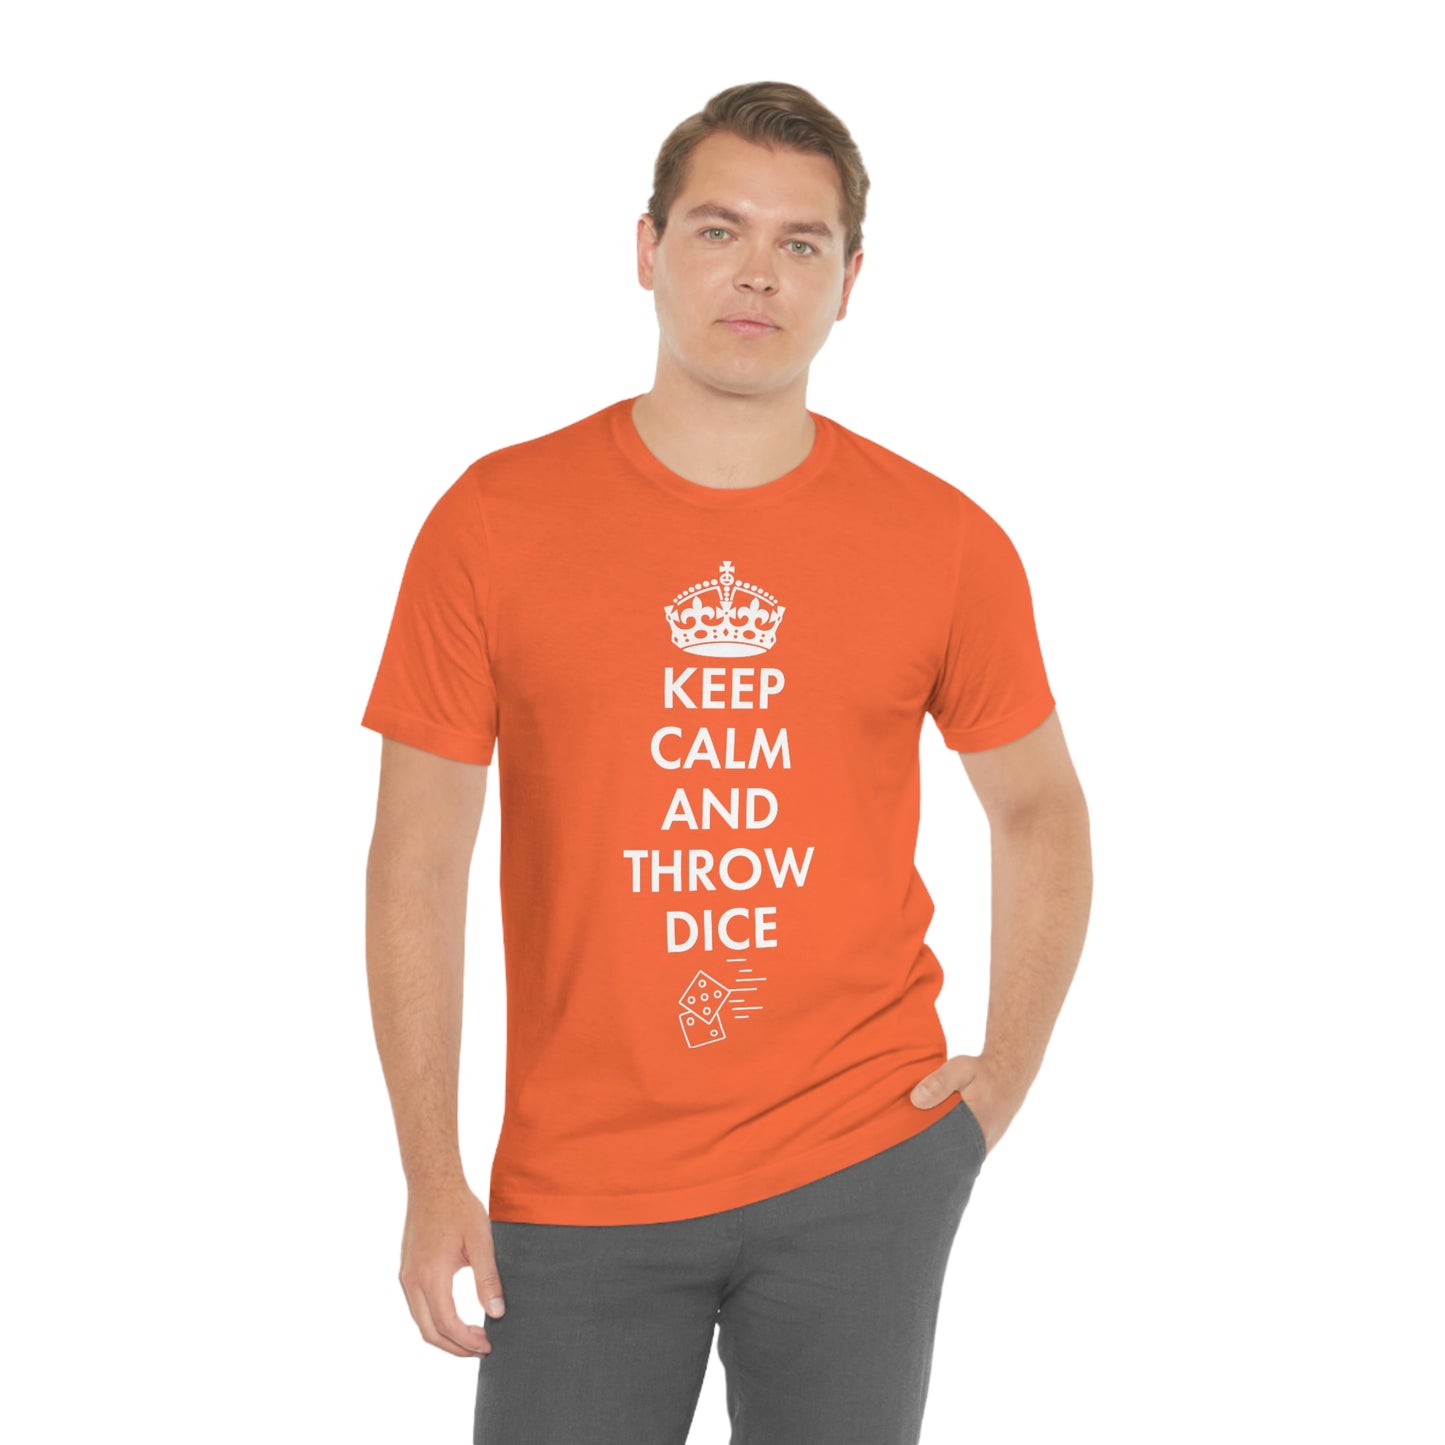 Keep Calm and Throw Dice crew neck (Unisex fit)